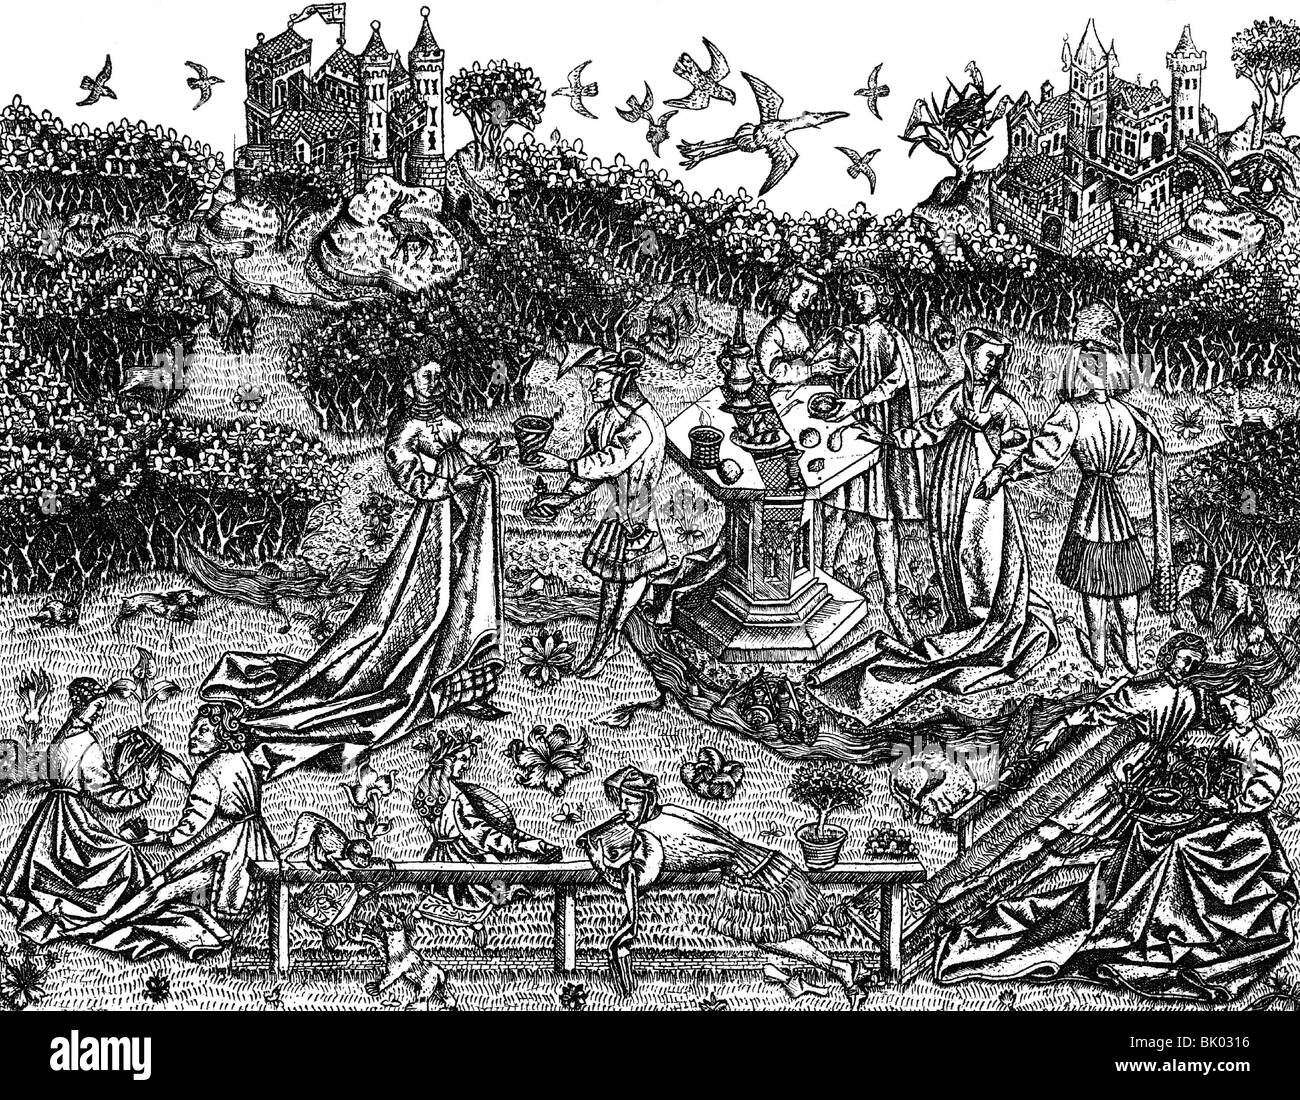 life in the Middle Ages, people, 'The Big Garden of Love', copper engraving, Lower Rhine area, late 14th century, Berlin, royal collection of prints, Stock Photo